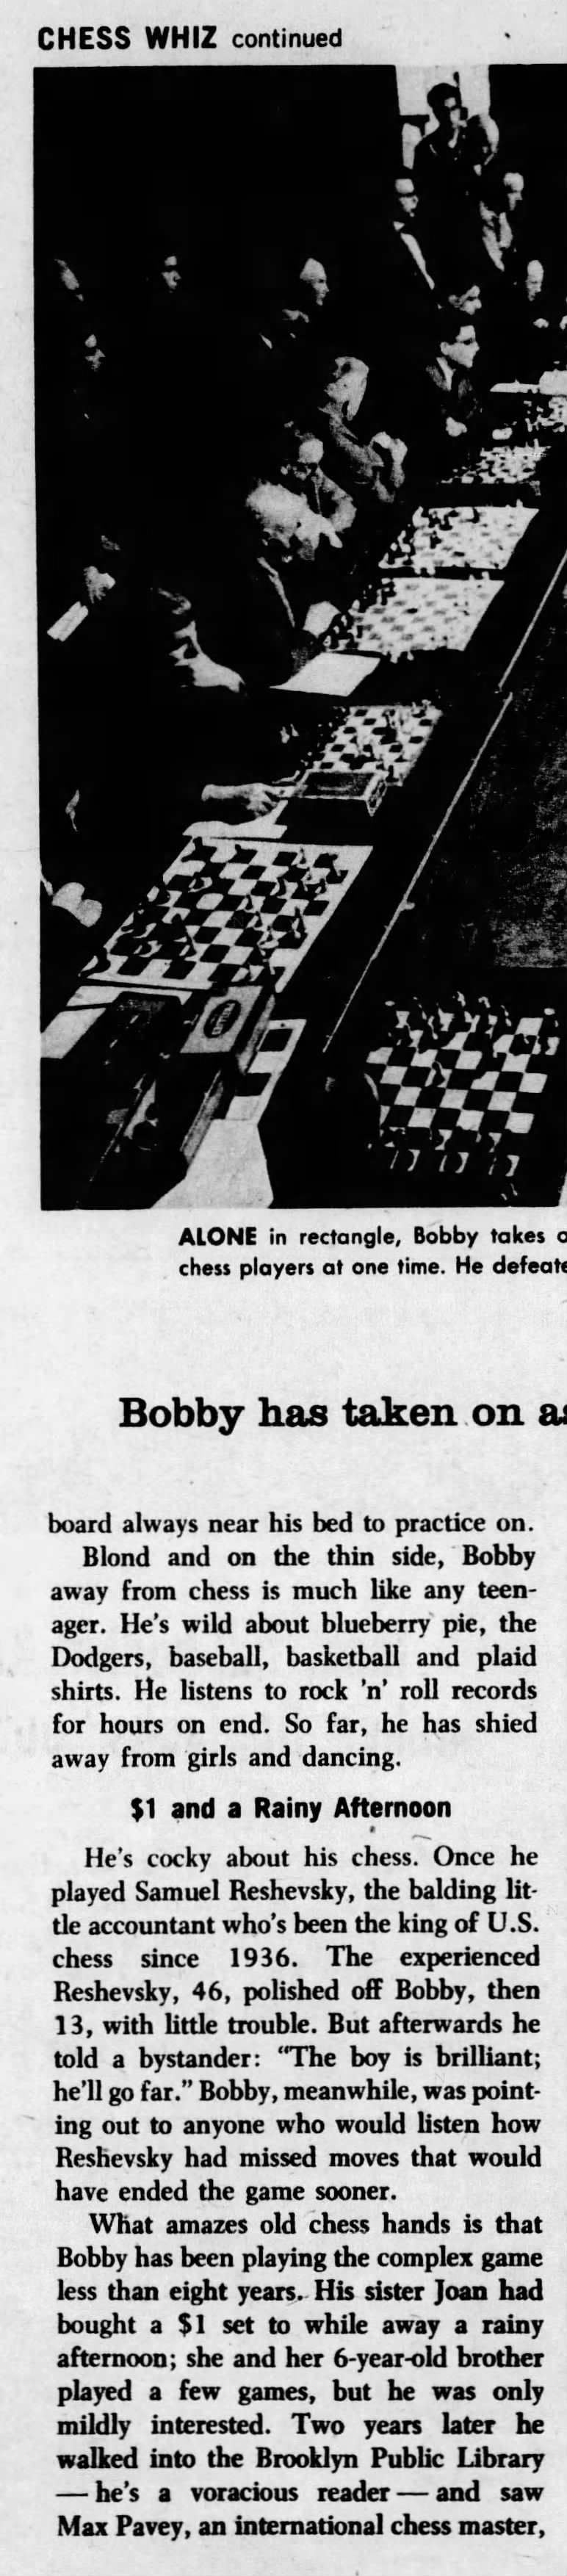 Only 14, he's a chess whiz (Column 4)